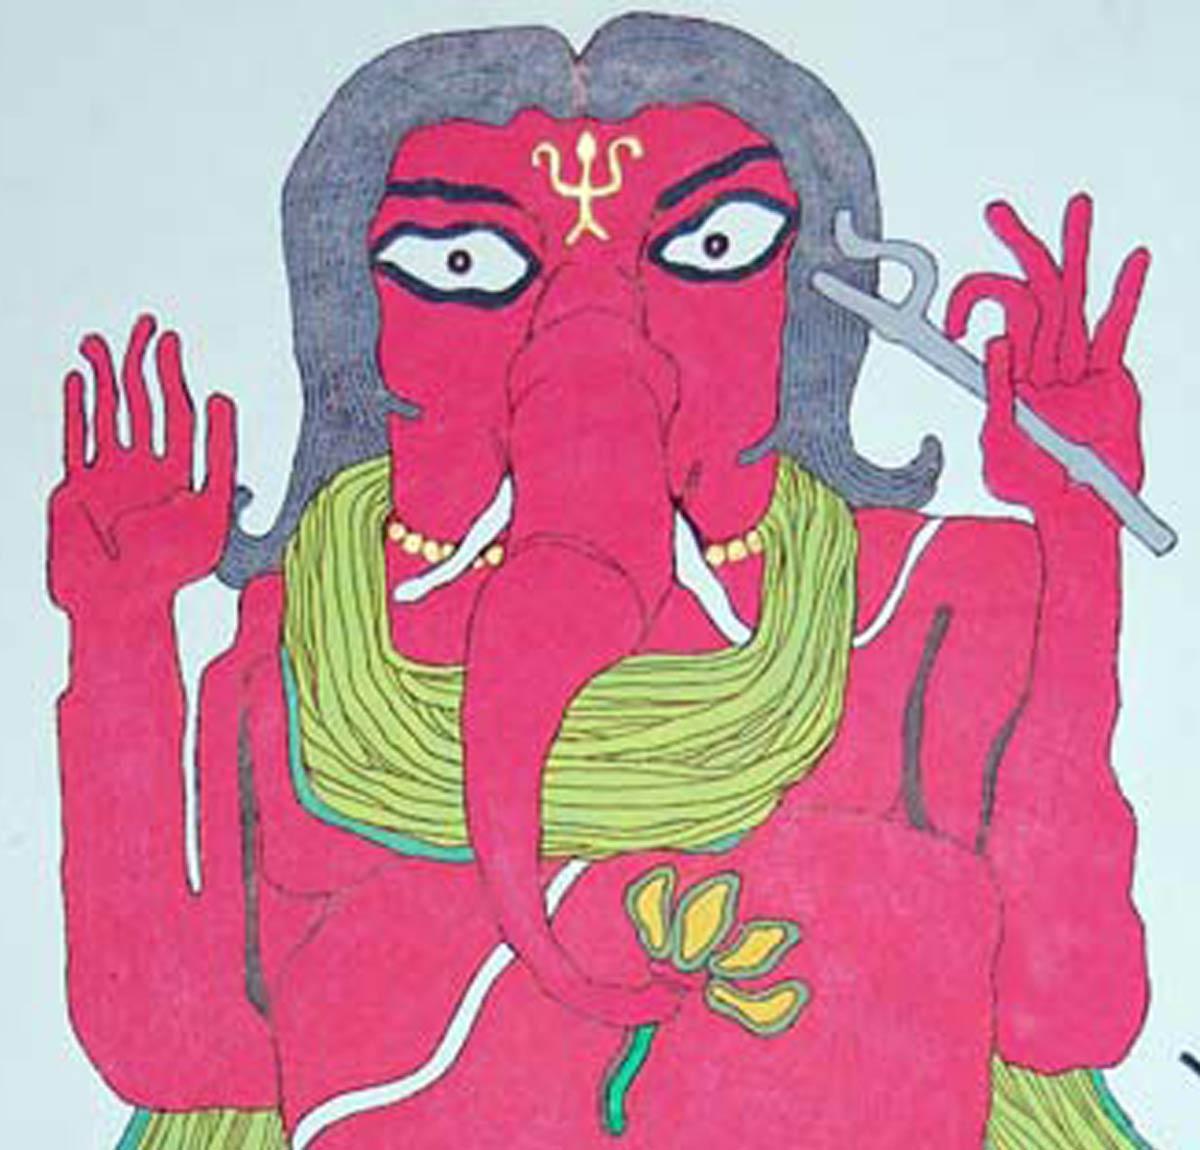 Prokash Karmakar - Ganesha - 20 x 14 inches (unframed size)
Mixed Media on paper
** Cost is inclusive exclusive of shipment ( unframed )

The Indian Mythology God , Lord Ganesha , The Son of Lord Shiv and Parvati is worshiped before the commencement